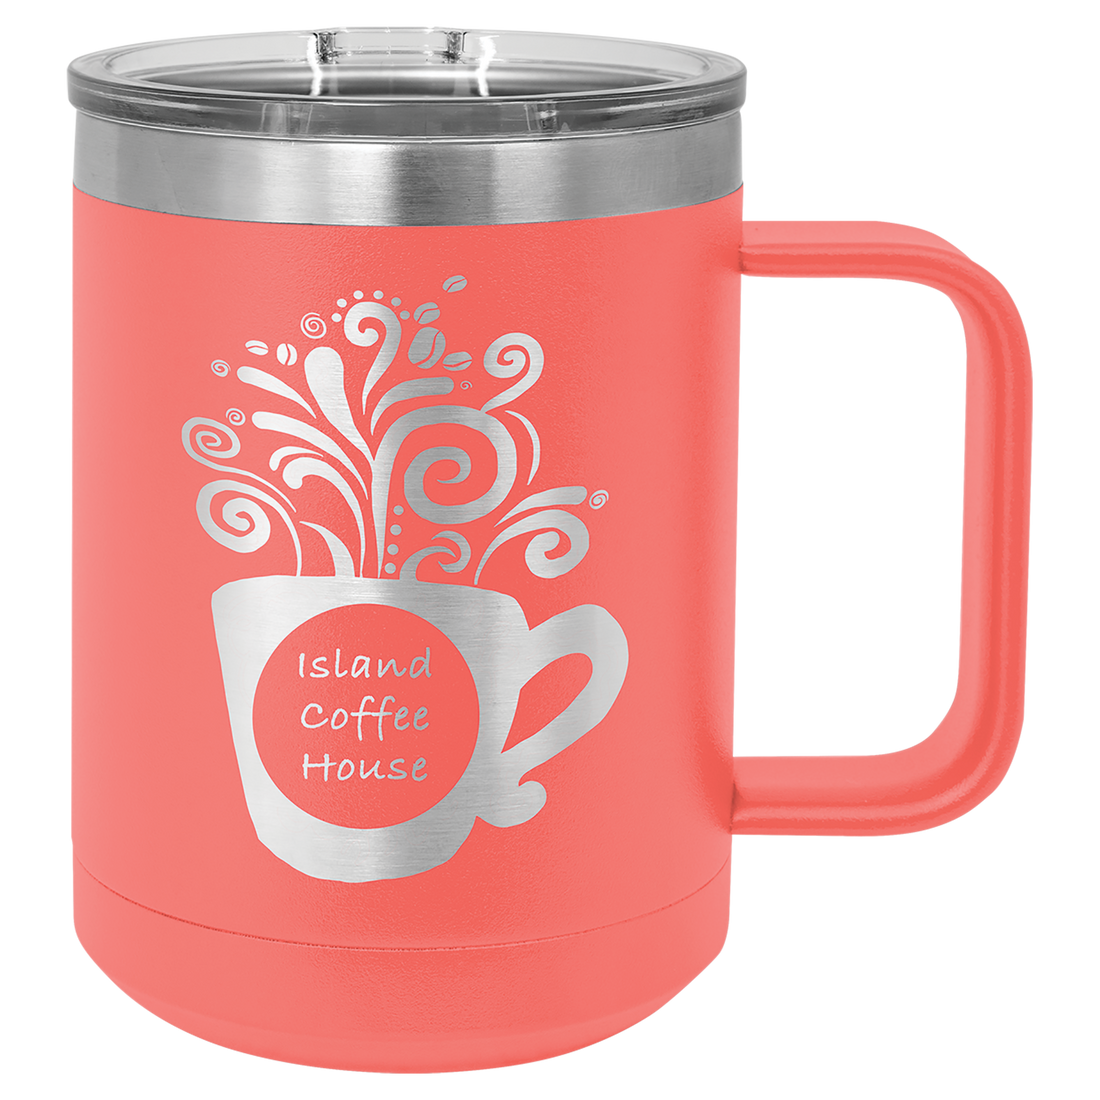 Coral insulated travel mug with logo engraving.